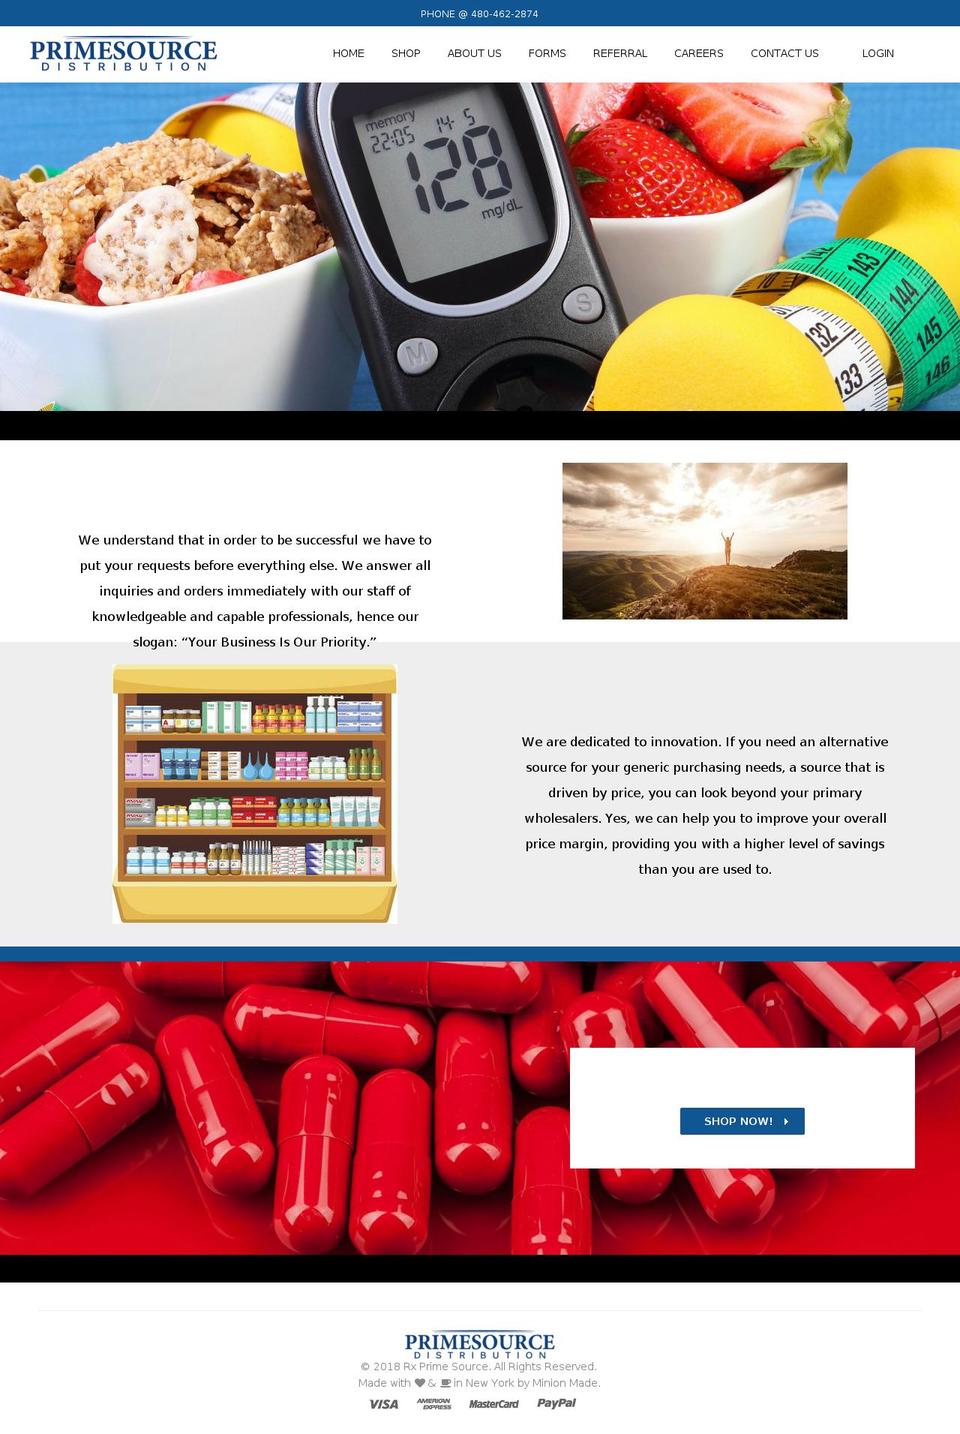 Made With ❤ By Minion Made Shopify theme site example rxprimesource.com